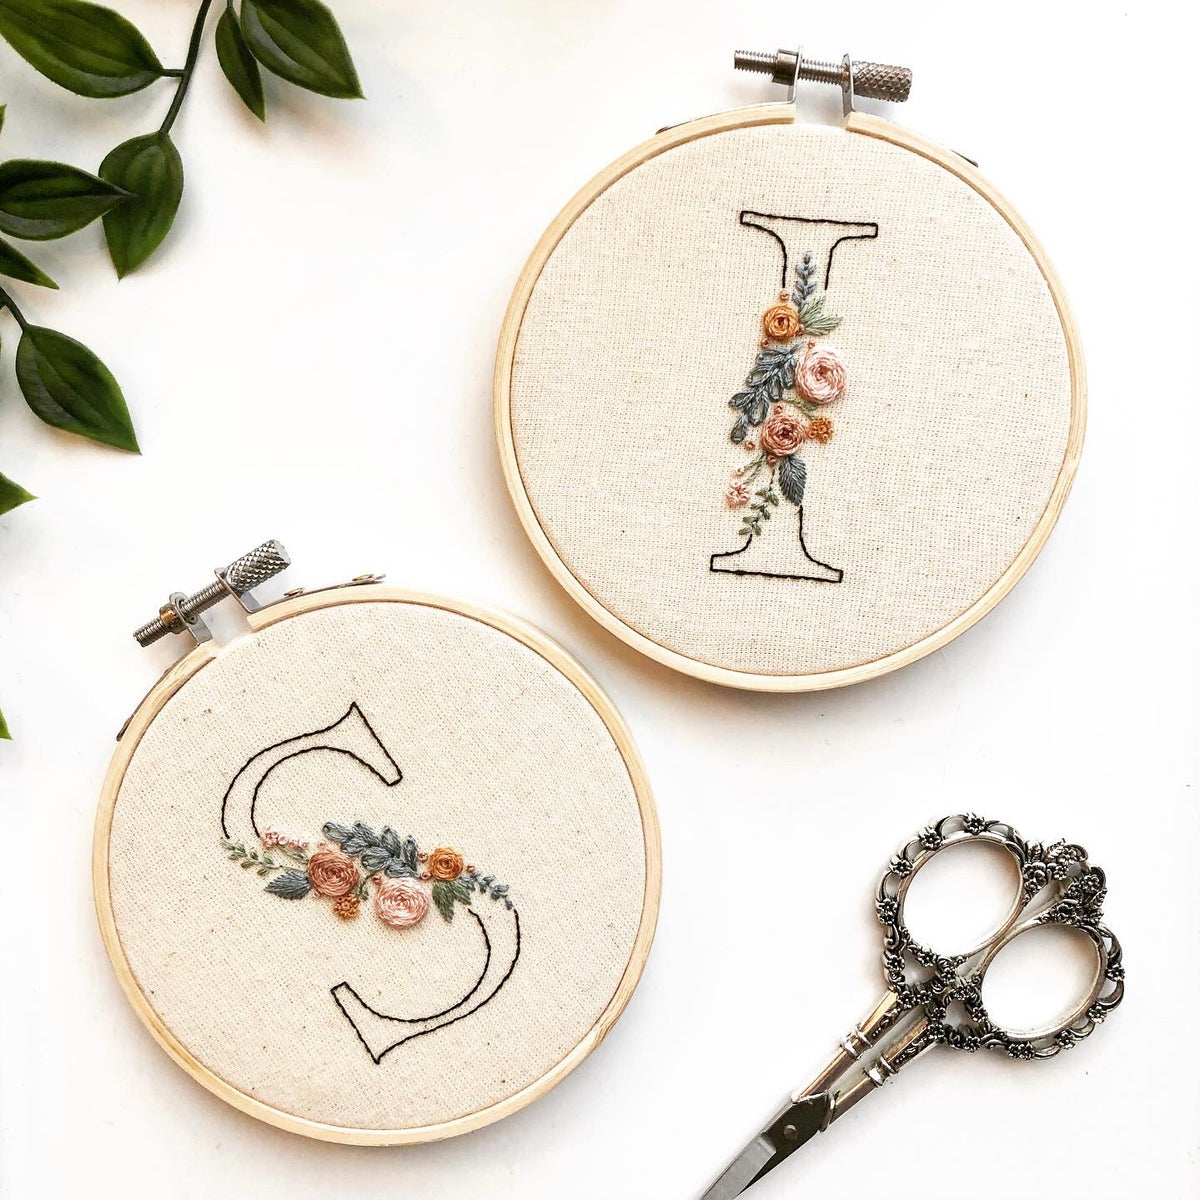 An Introduction to Embroidery Journals: Supplies and More